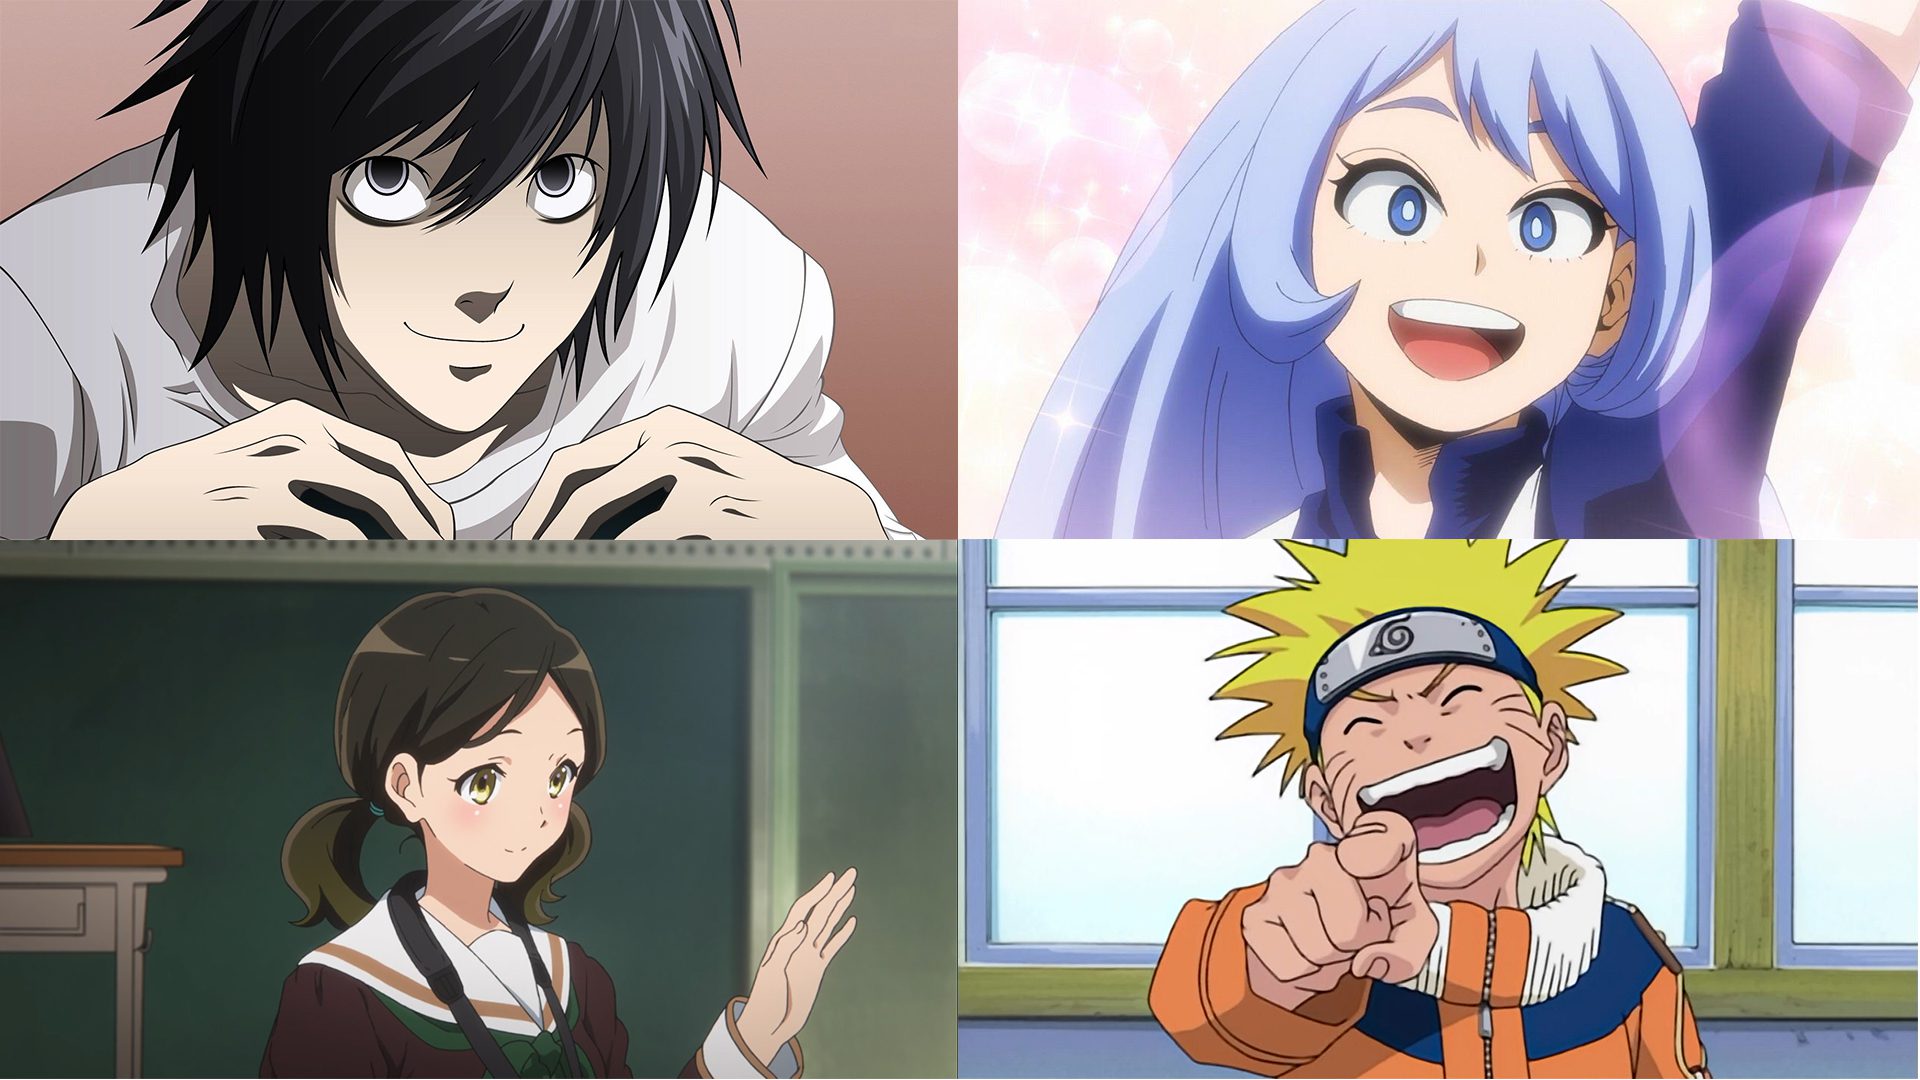 So Many Anime Characters Have Birthdays Today